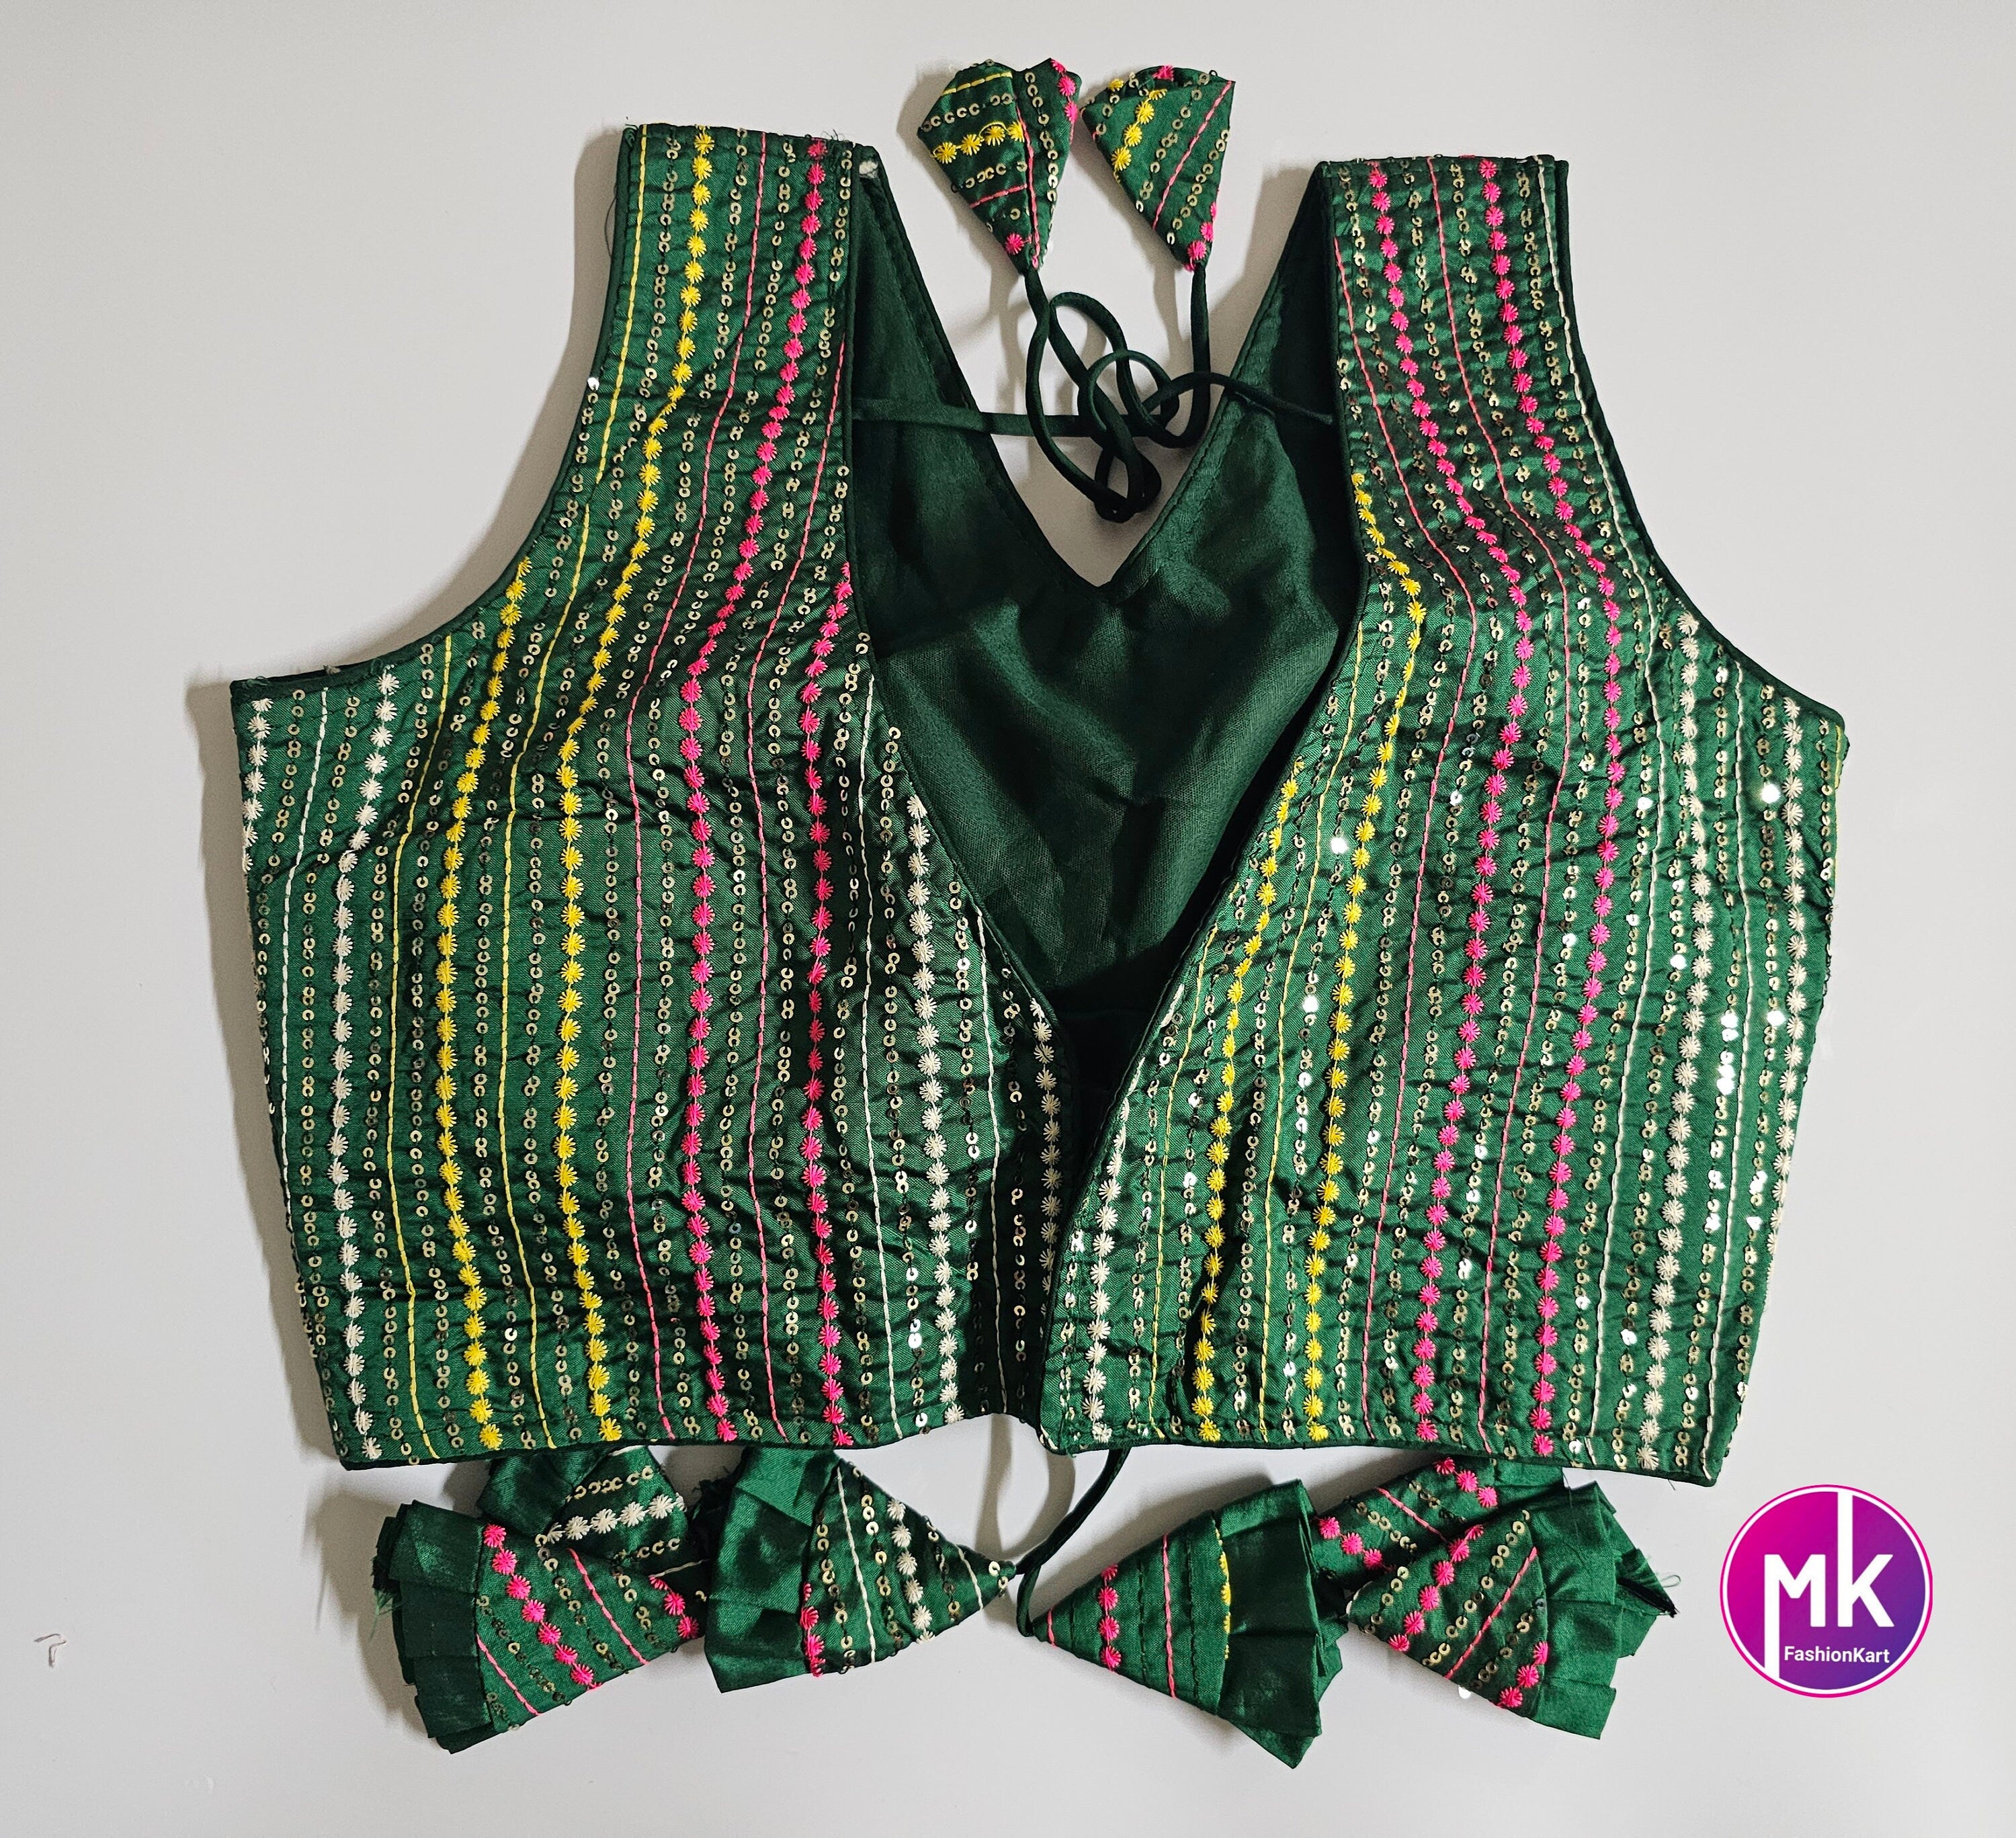 Readymade Saree Blouse - Green with multi-color embroidered and sequence work blouse - Princess cut padded - size 38" (Upto 40")